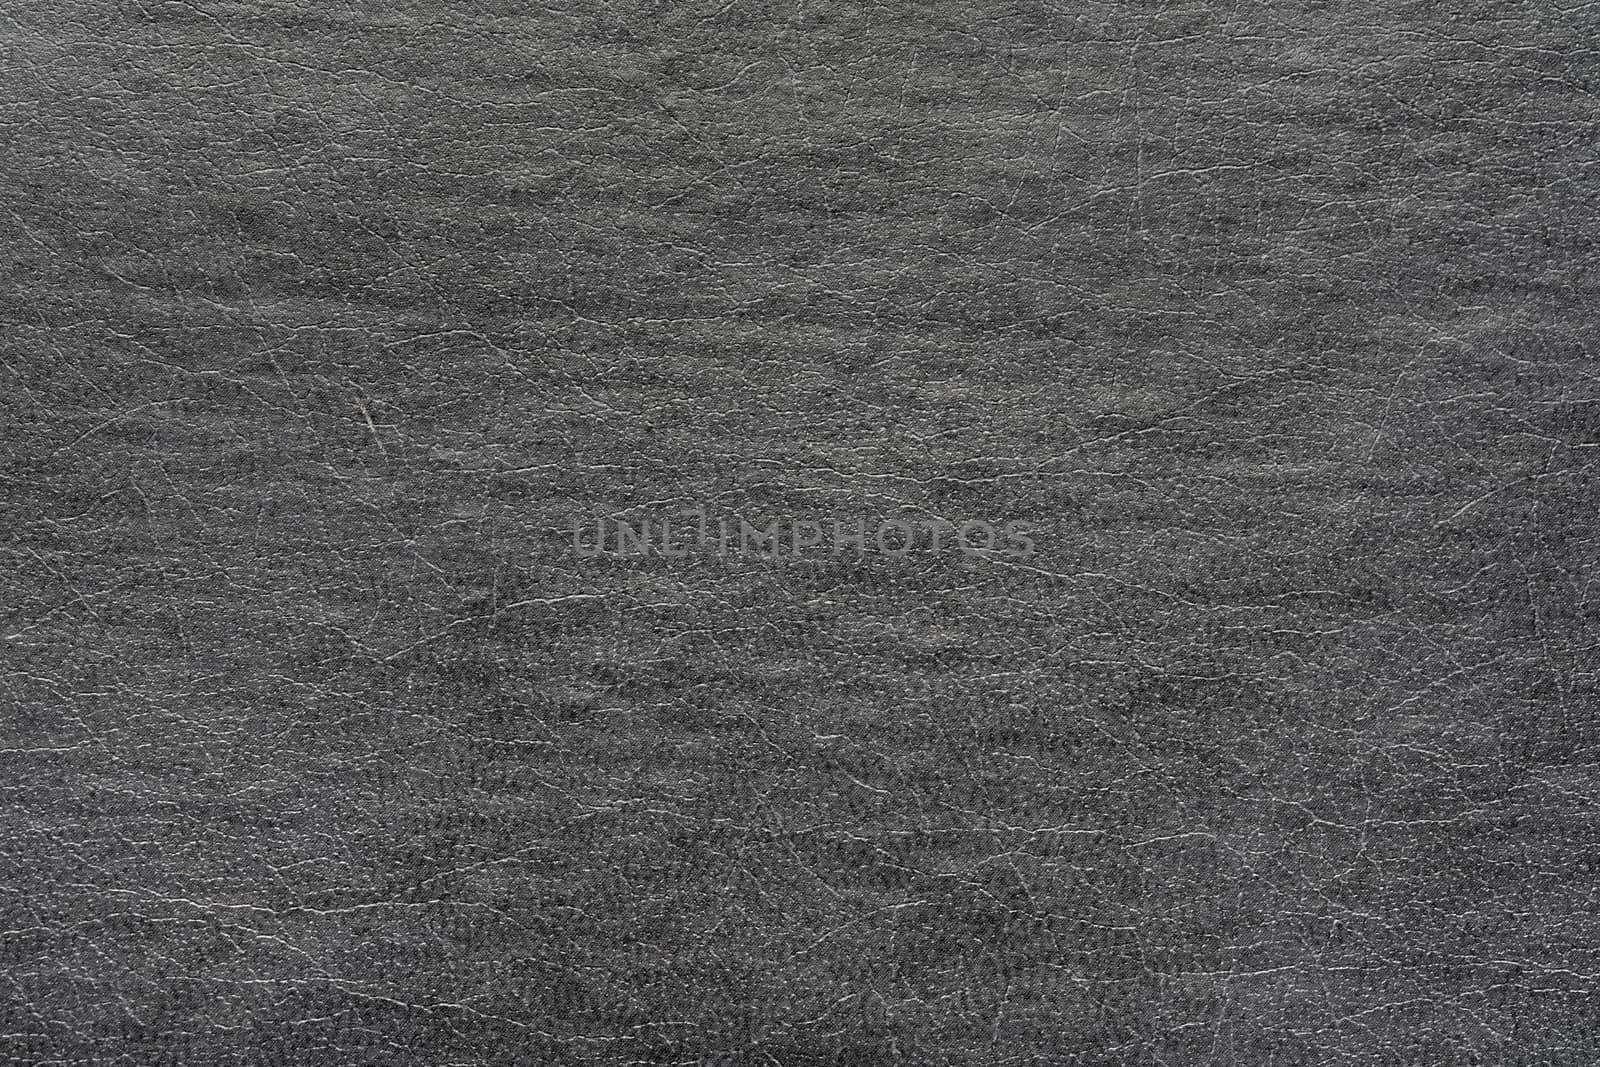 Synthetic dark gray, black leather for background. Close-up decoration material by Alexander-Piragis